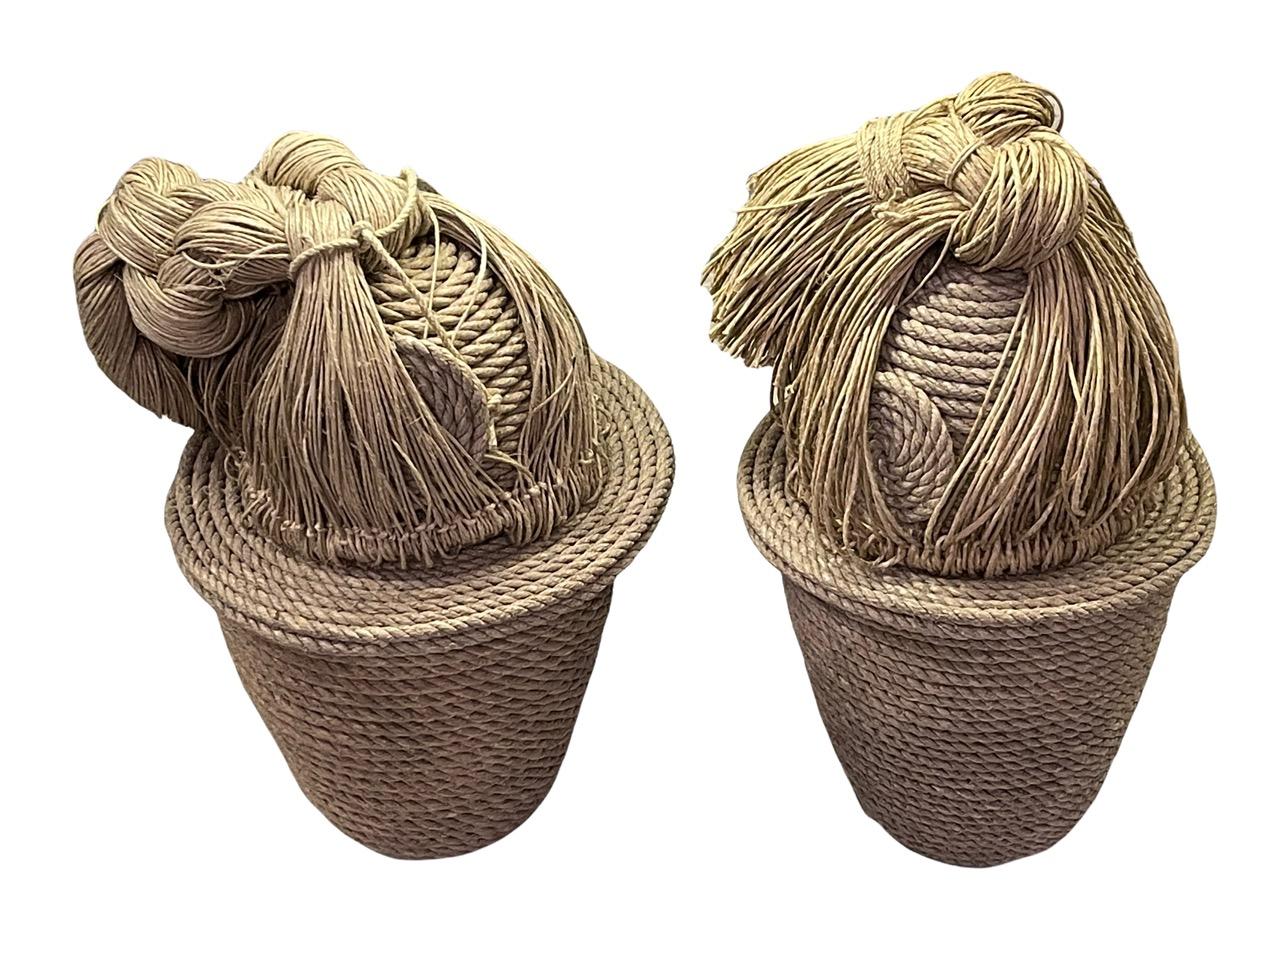 Hand-Crafted Pair of Contemporary 21st Century French Christian Astuguevieille Jute Rope Co